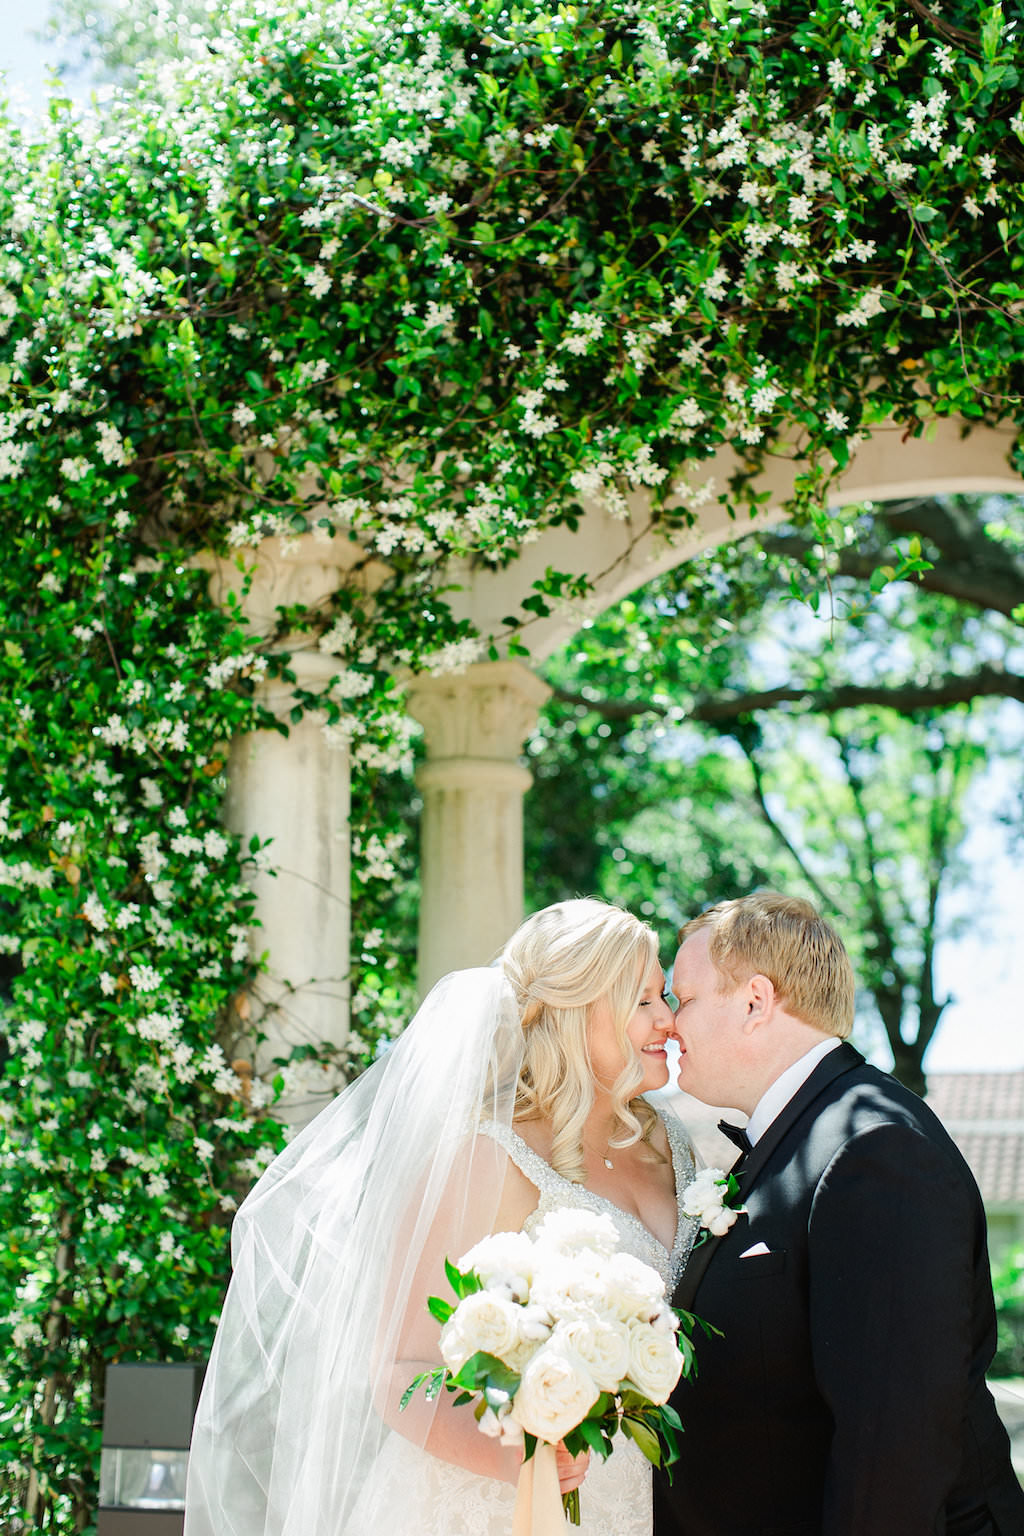 Outdoor Garden Wedding Portrait, Bride with White Garden Rose and Greenery Bouquet, Groom in Tuxedo with White Rose Boutonnière | Clearwater Wedding Photographer Ailyn La Torre Photography